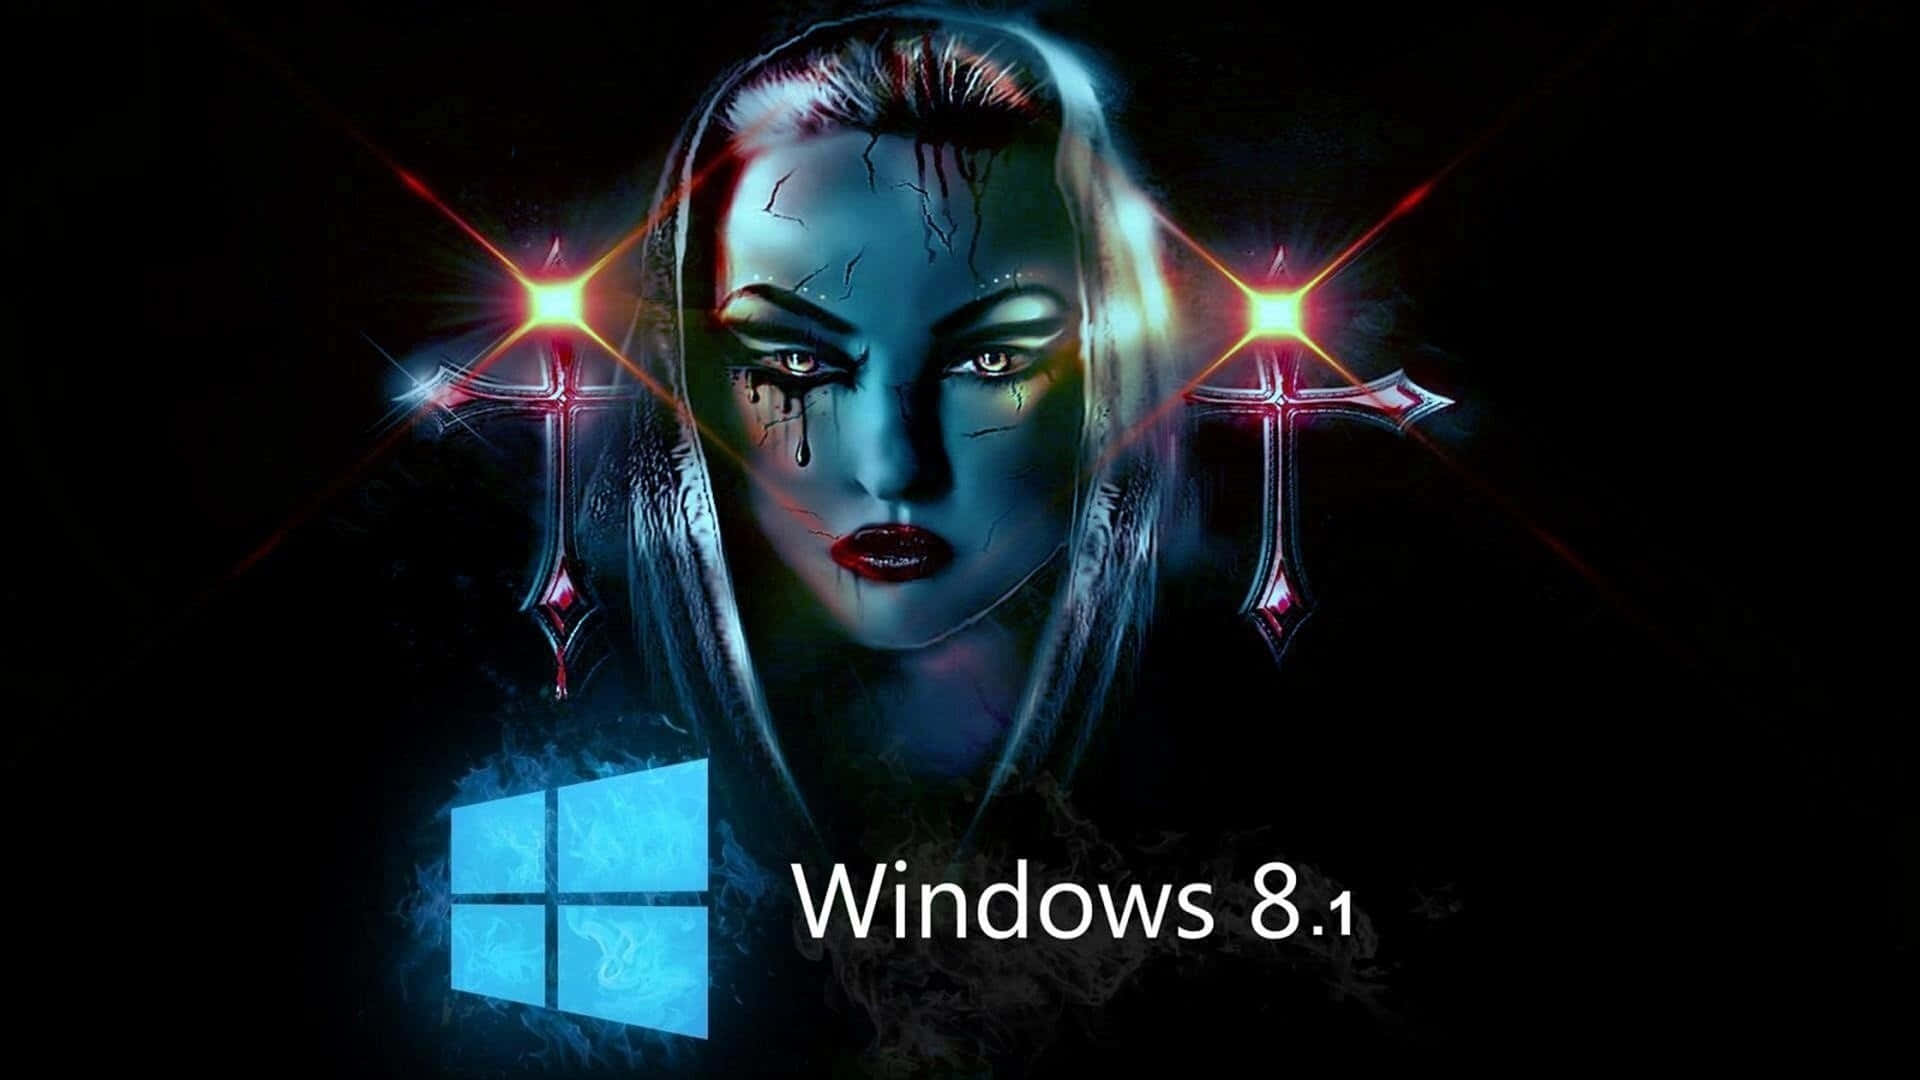 Windows 8 1 - A Woman With A Sword And A Cross Background